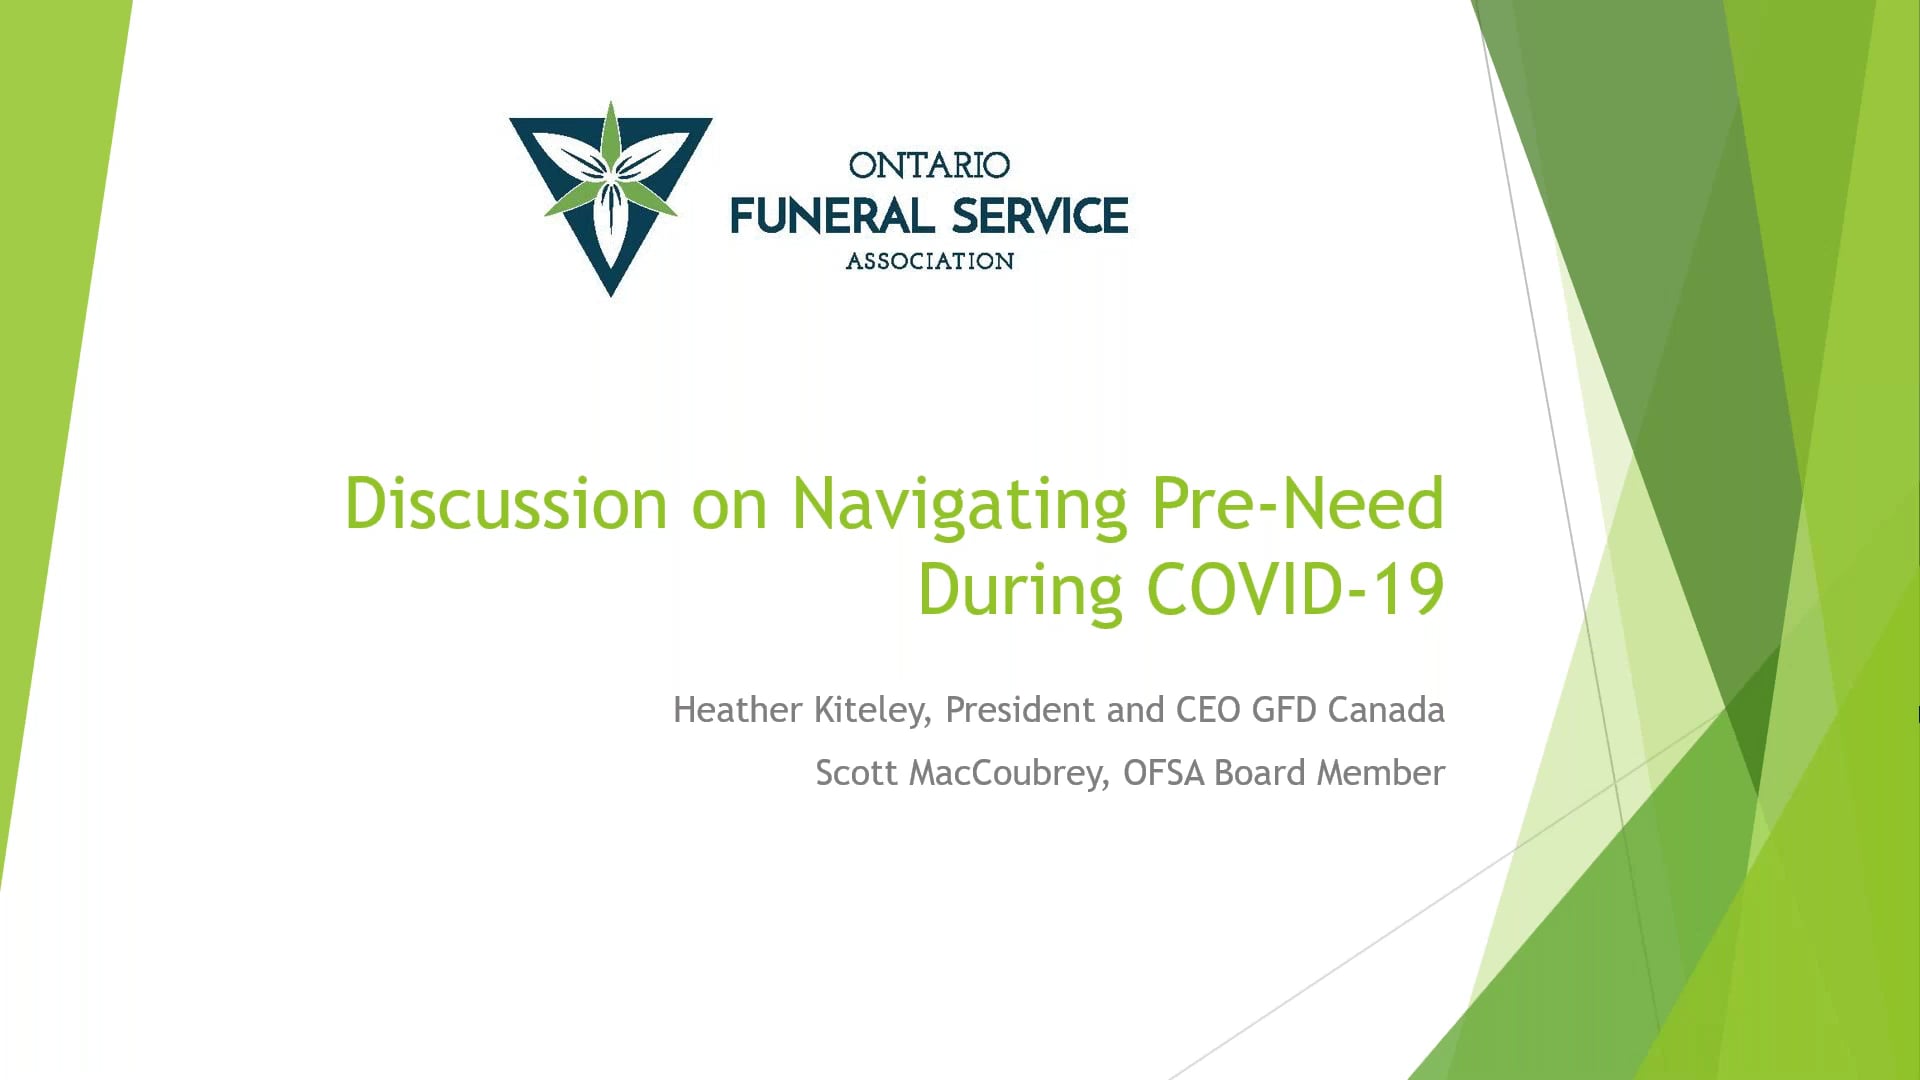 Discussion on Navigating Pre-Need During COVID-19 (1)